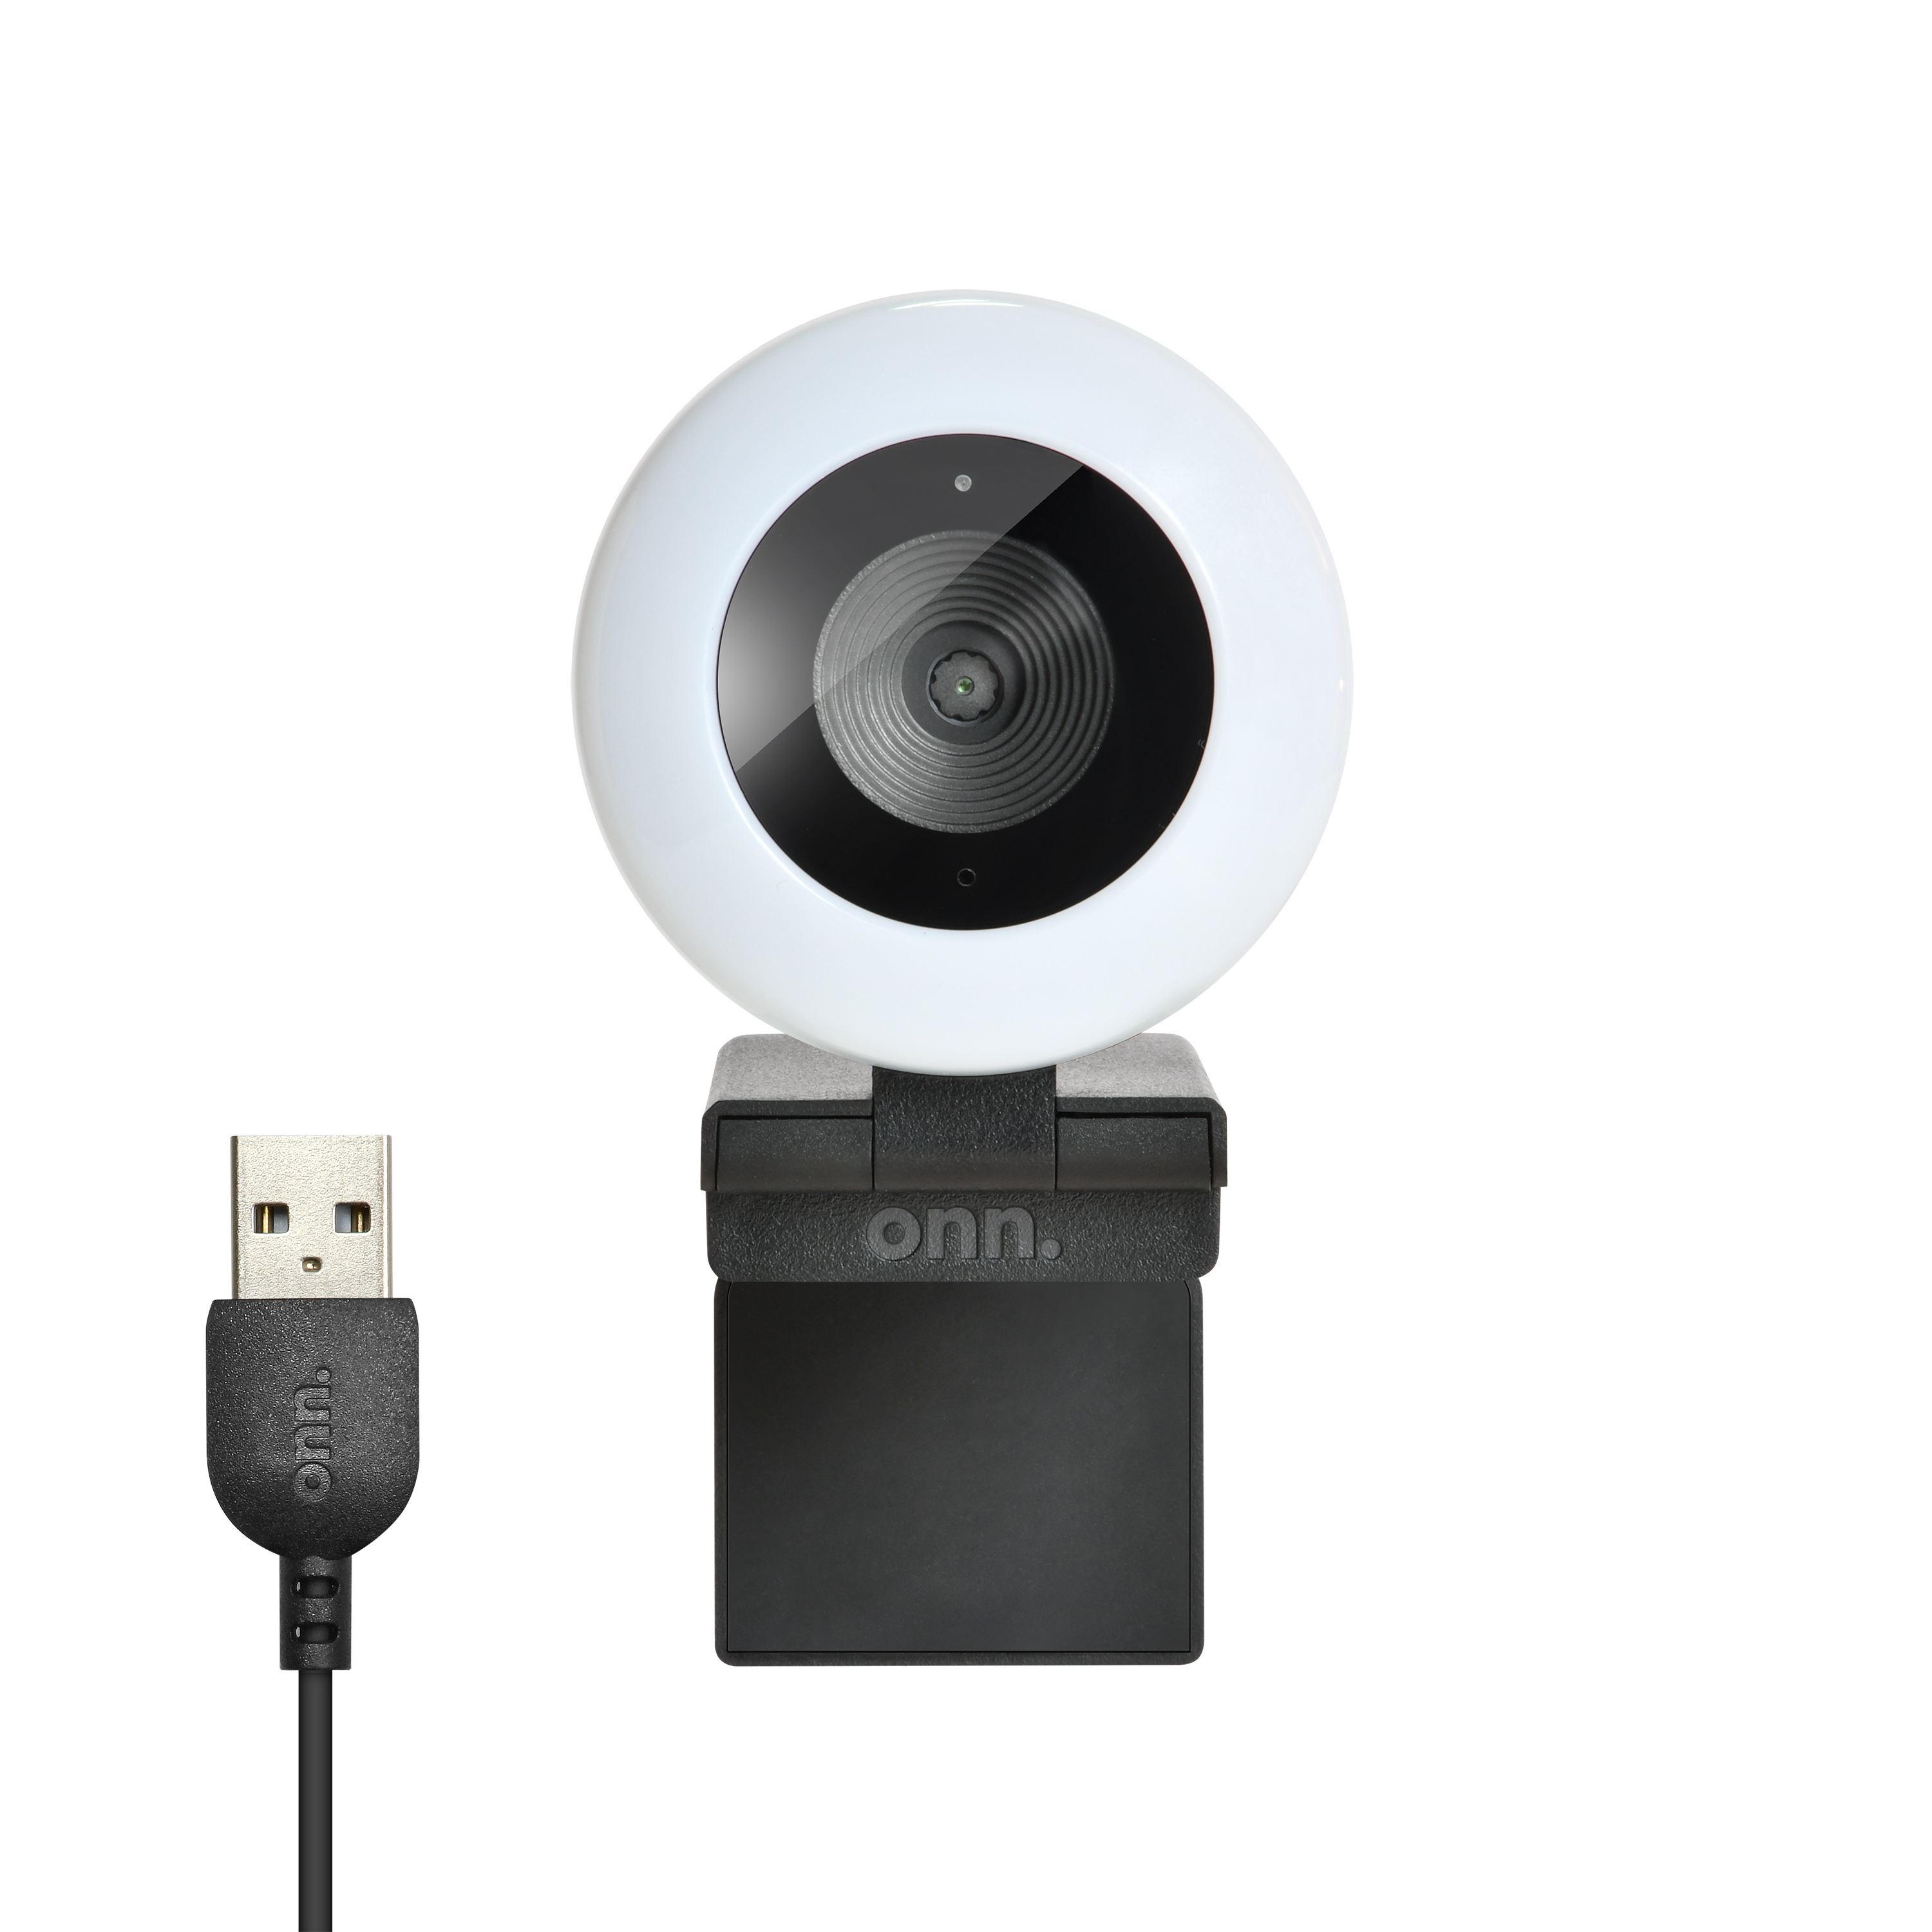 onn. Webcam with Ring Light w/3 LED Levels, Autofocus, Built-in Microphone, White & Black - image 4 of 7